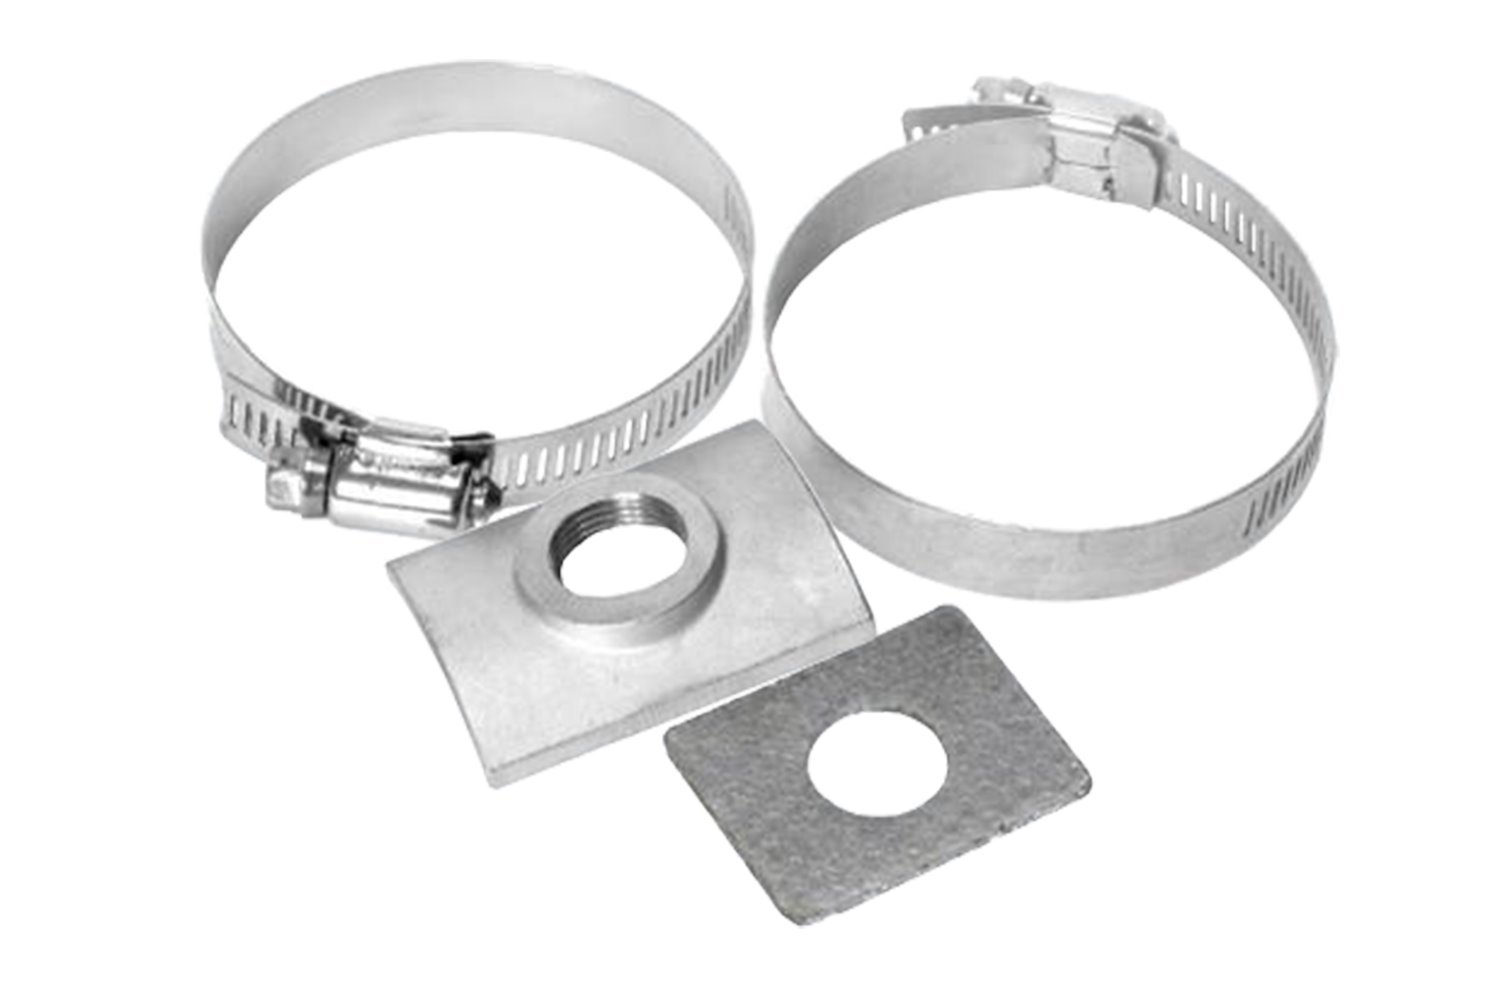 Oxygen Sensor Bung Kit with Band Clamp or